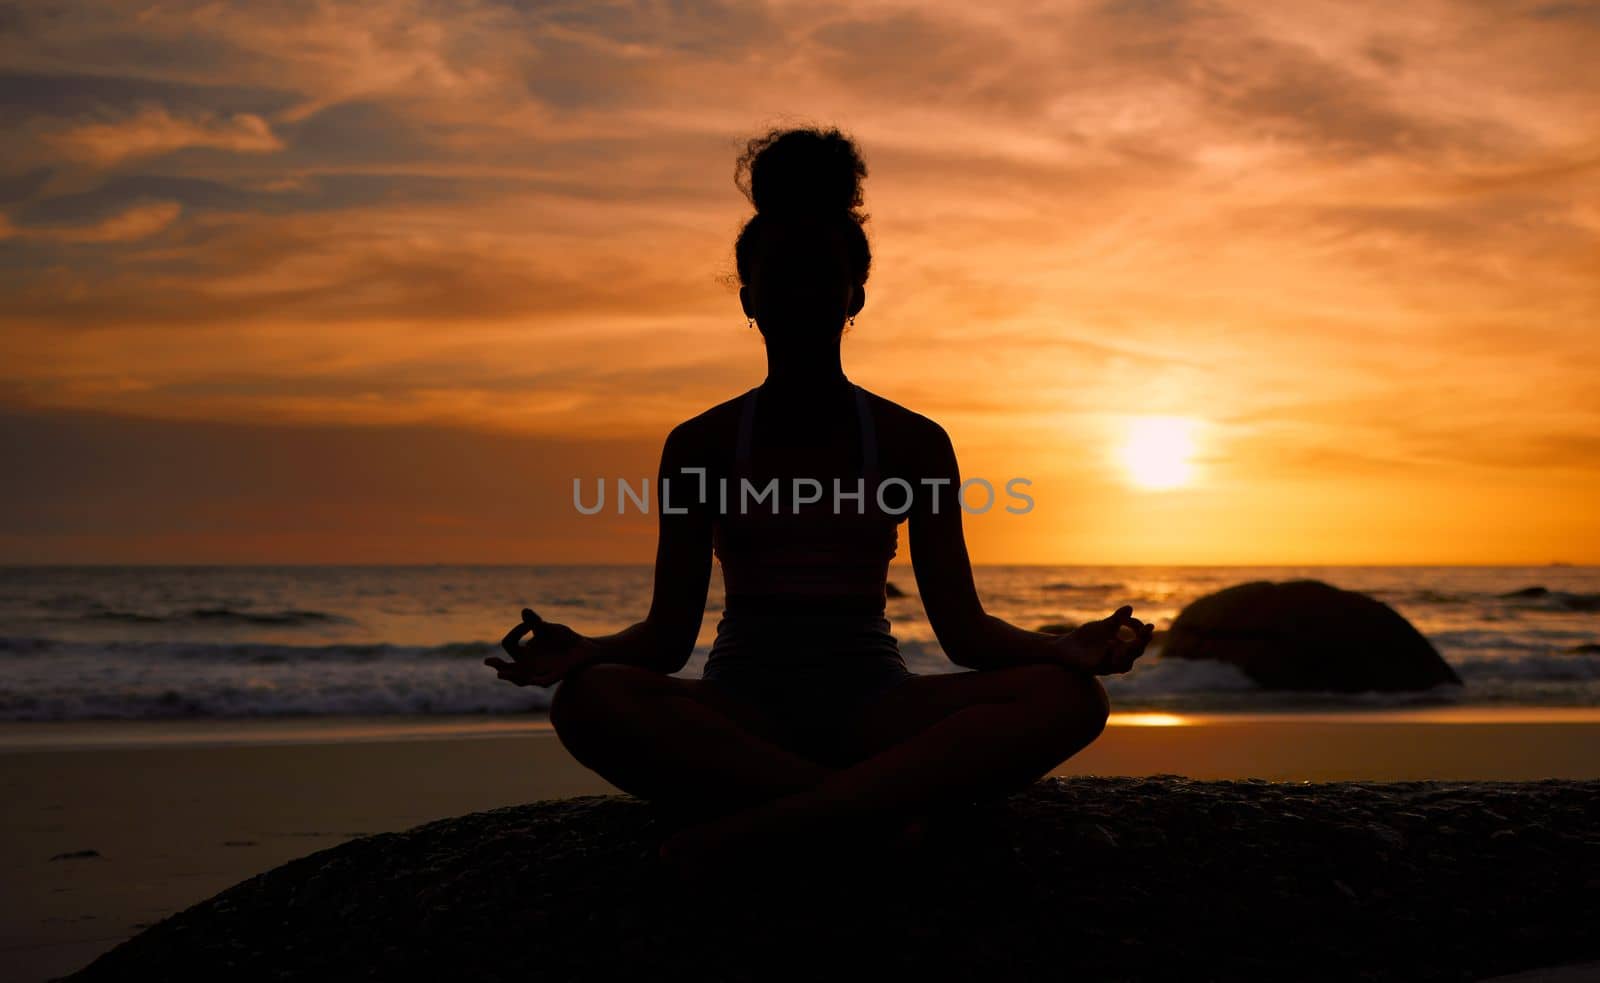 Sunset, beach and silhouette of a woman in a lotus pose while doing a yoga exercise by the sea. Peace, zen and shadow of a calm female doing meditation or pilates workout outdoor at dusk by the ocean by YuriArcurs